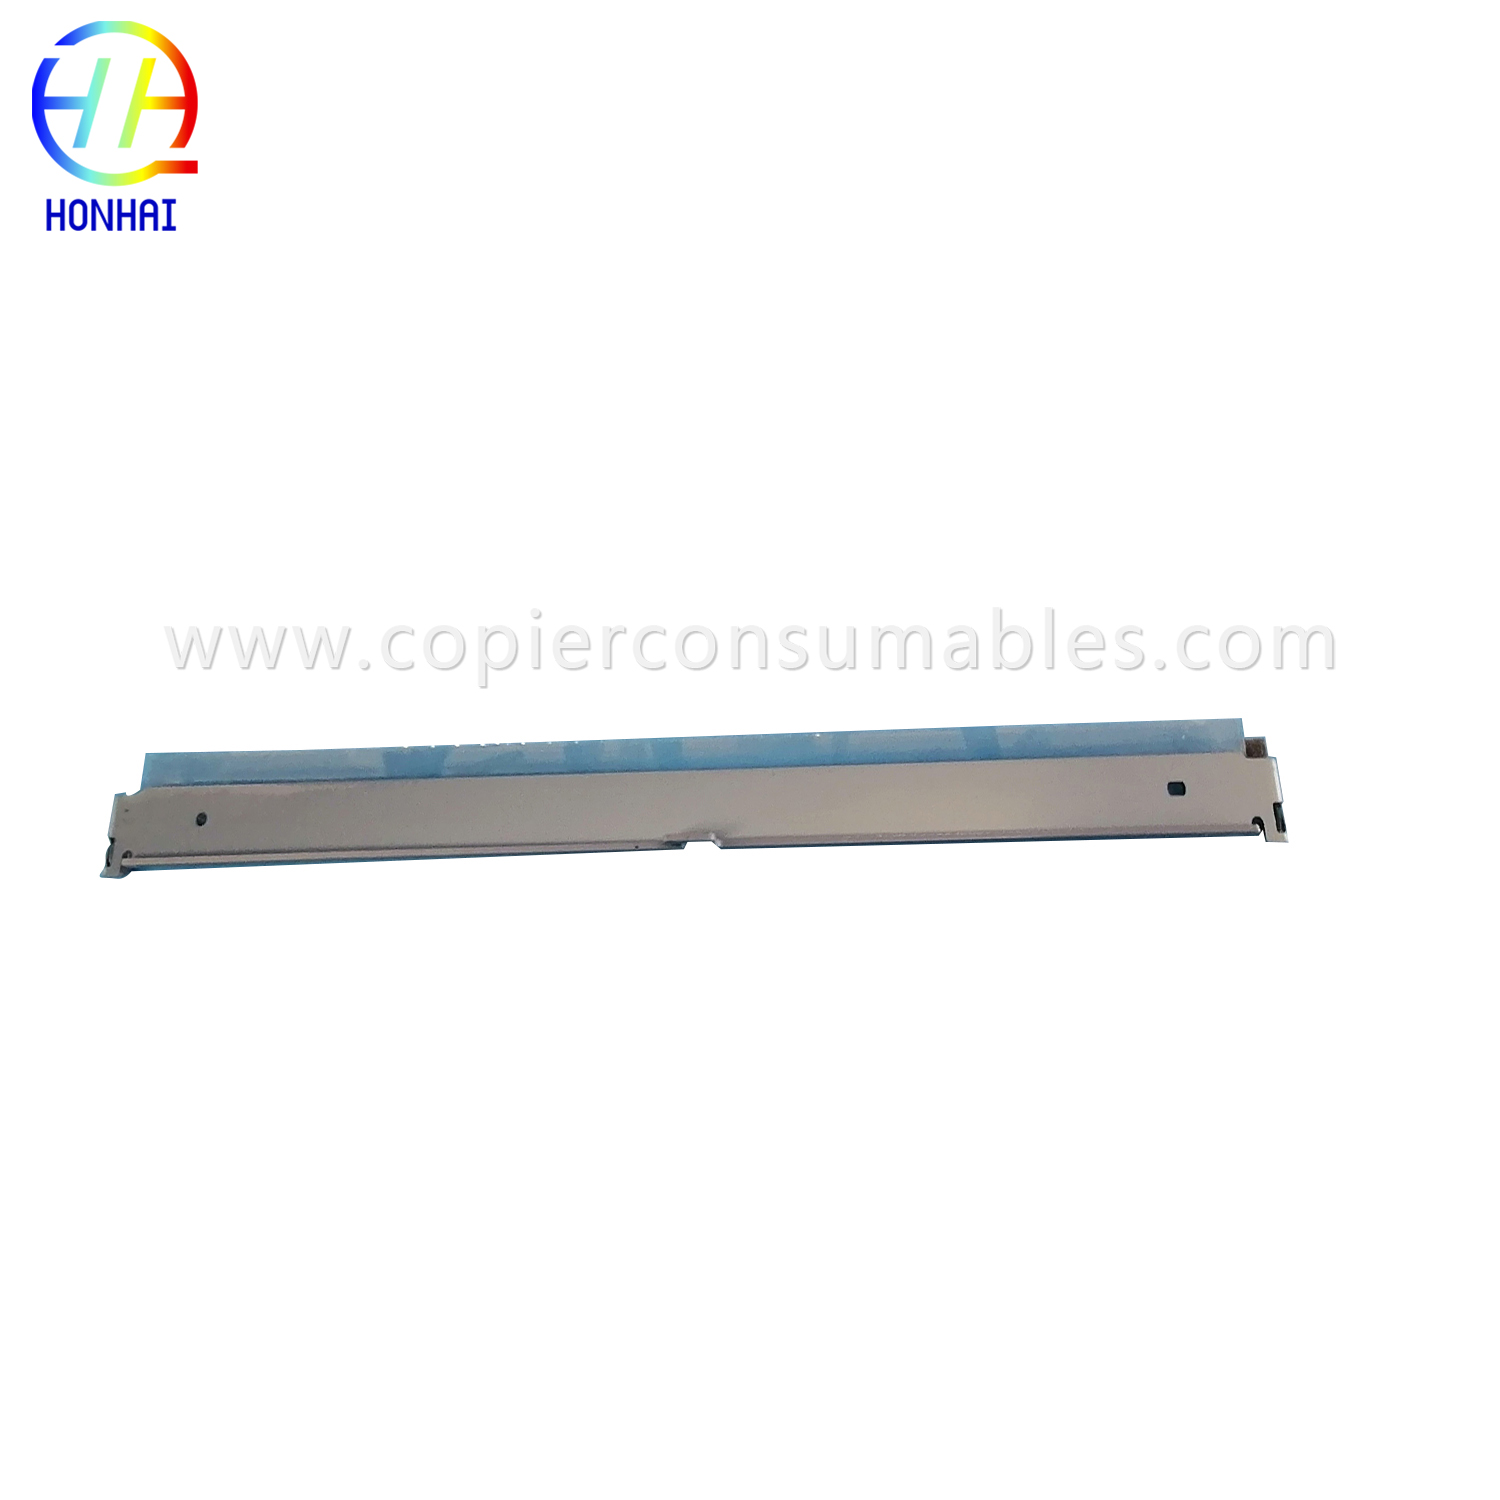 IBT Cleaning Blade for Ricoh MPC3003 3503 4503 5503 6003